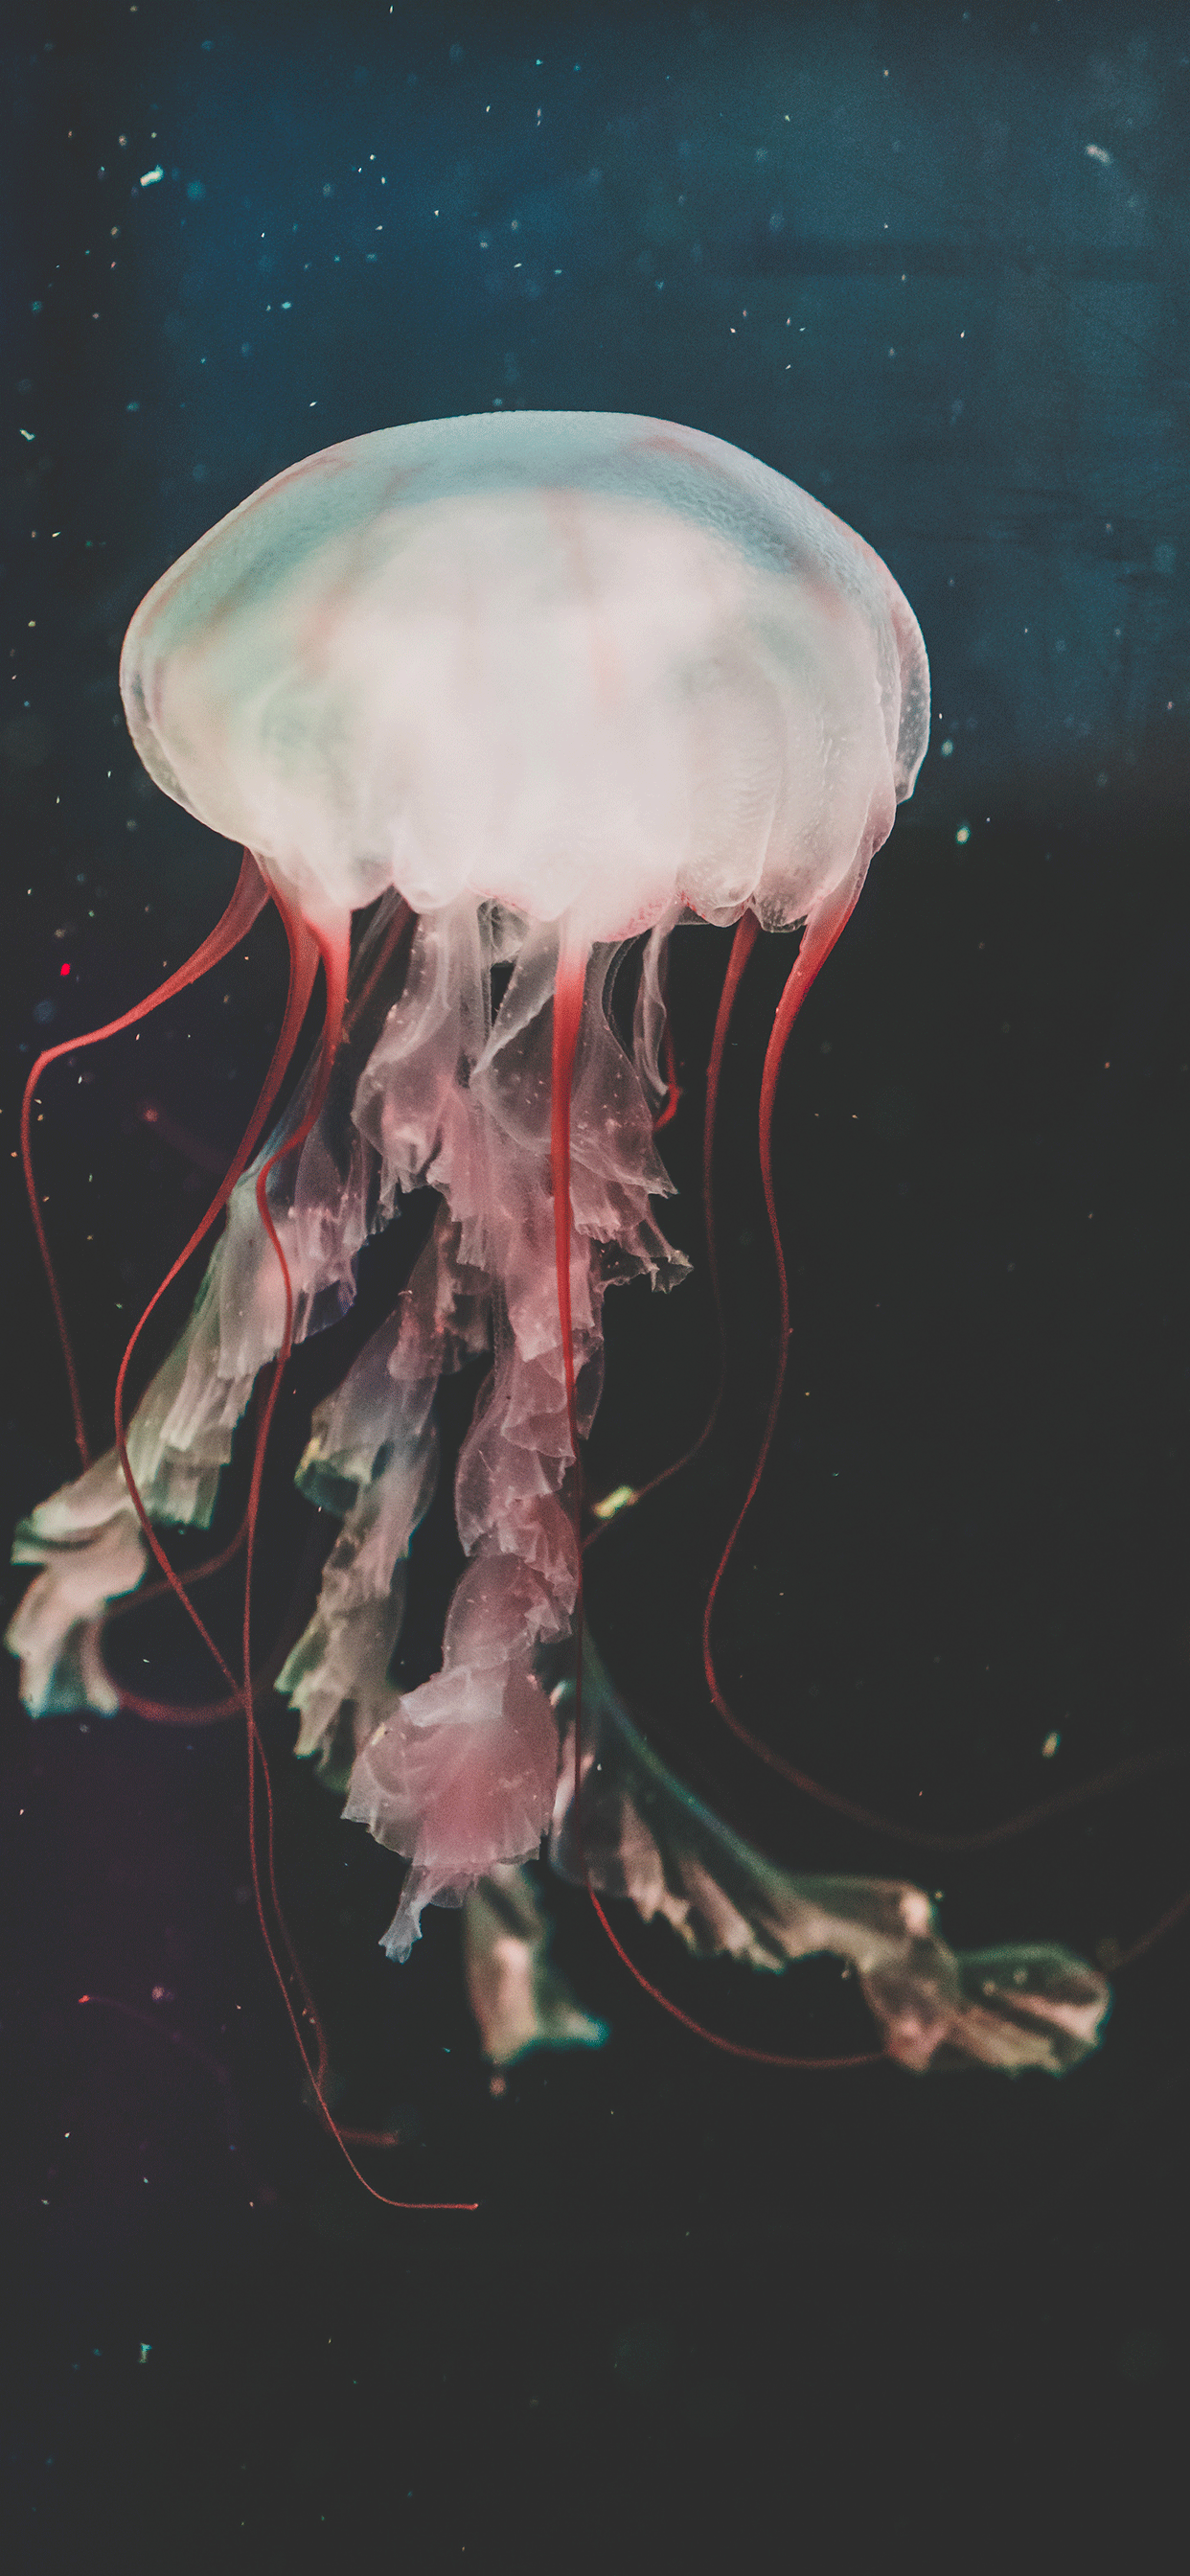 Jellyfish Iphone Wallpapers